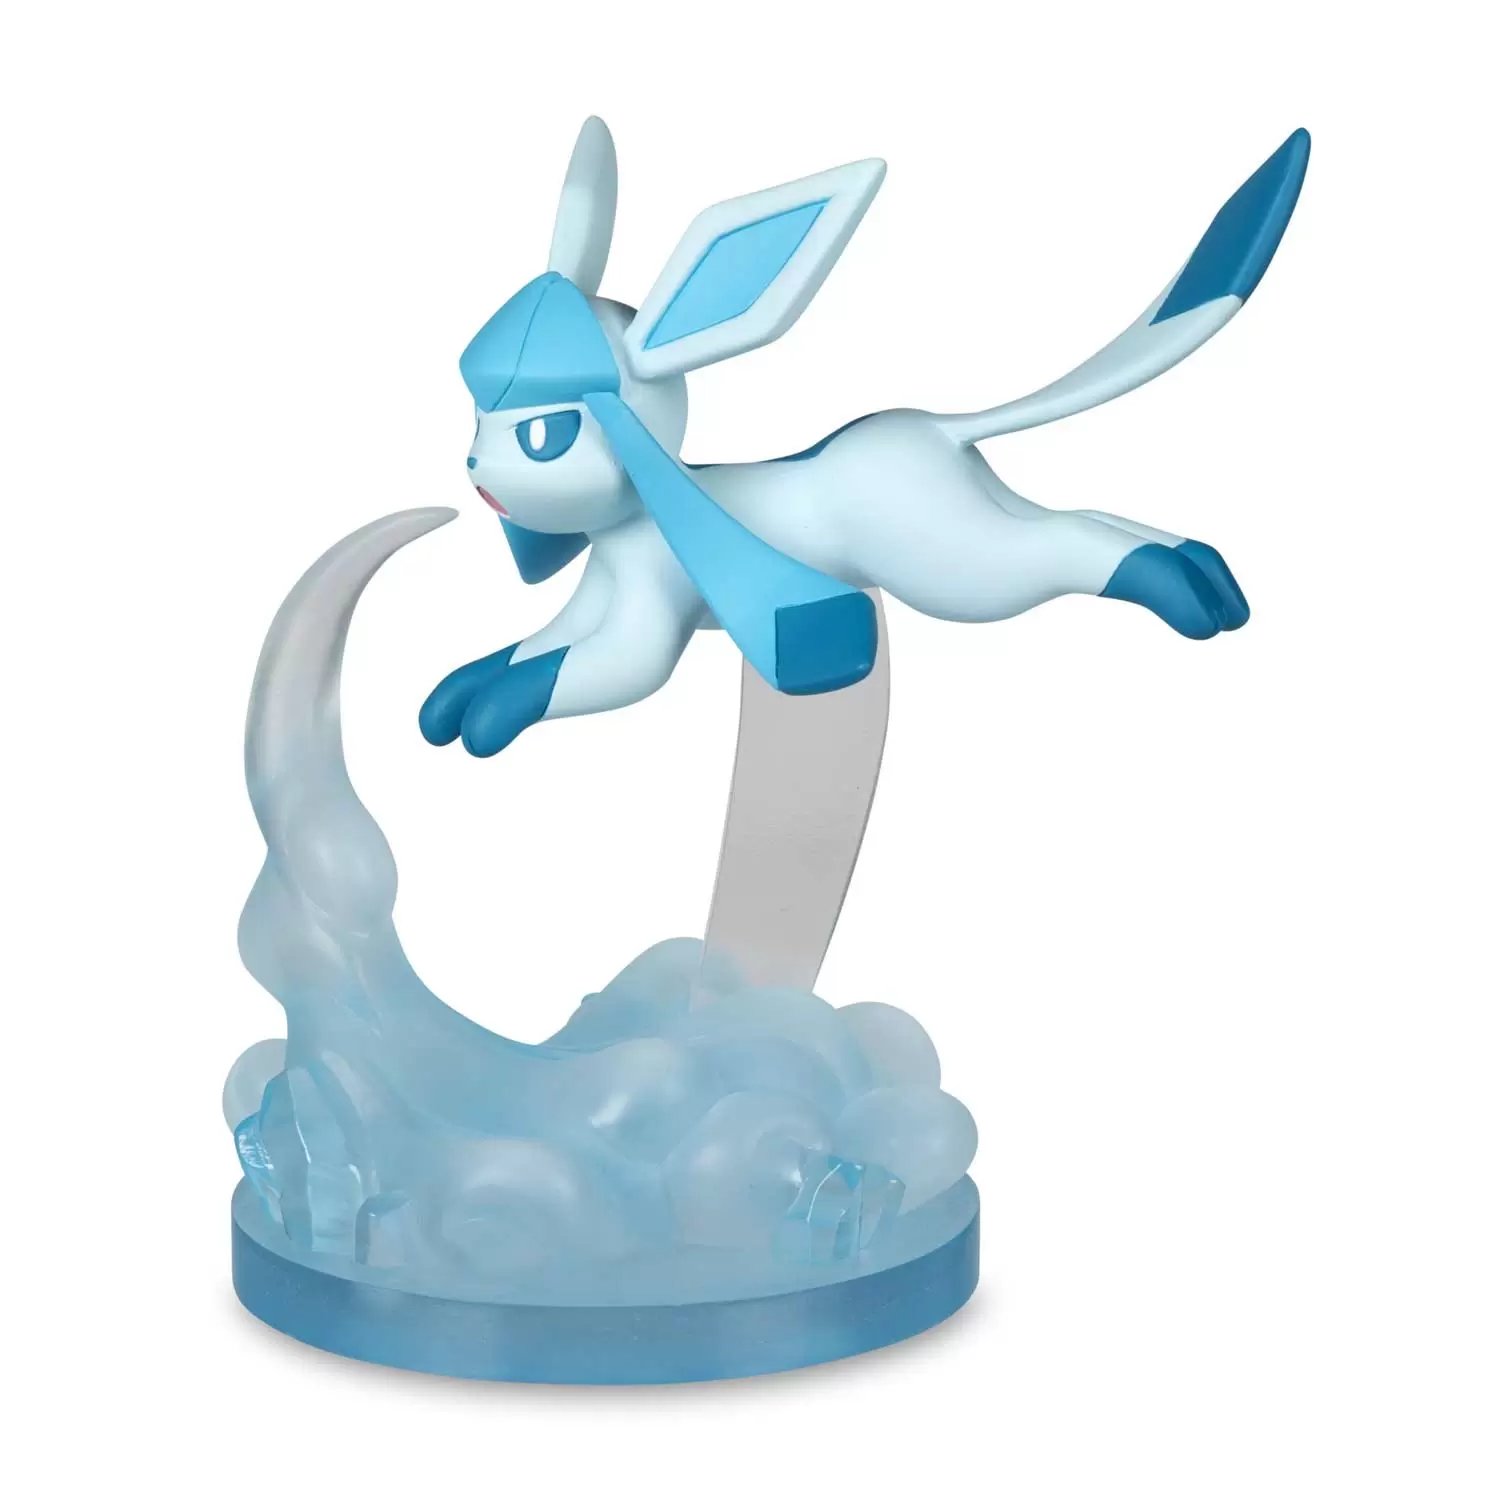 Pokémon Gallery Figures - Glaceon: Icy Wind